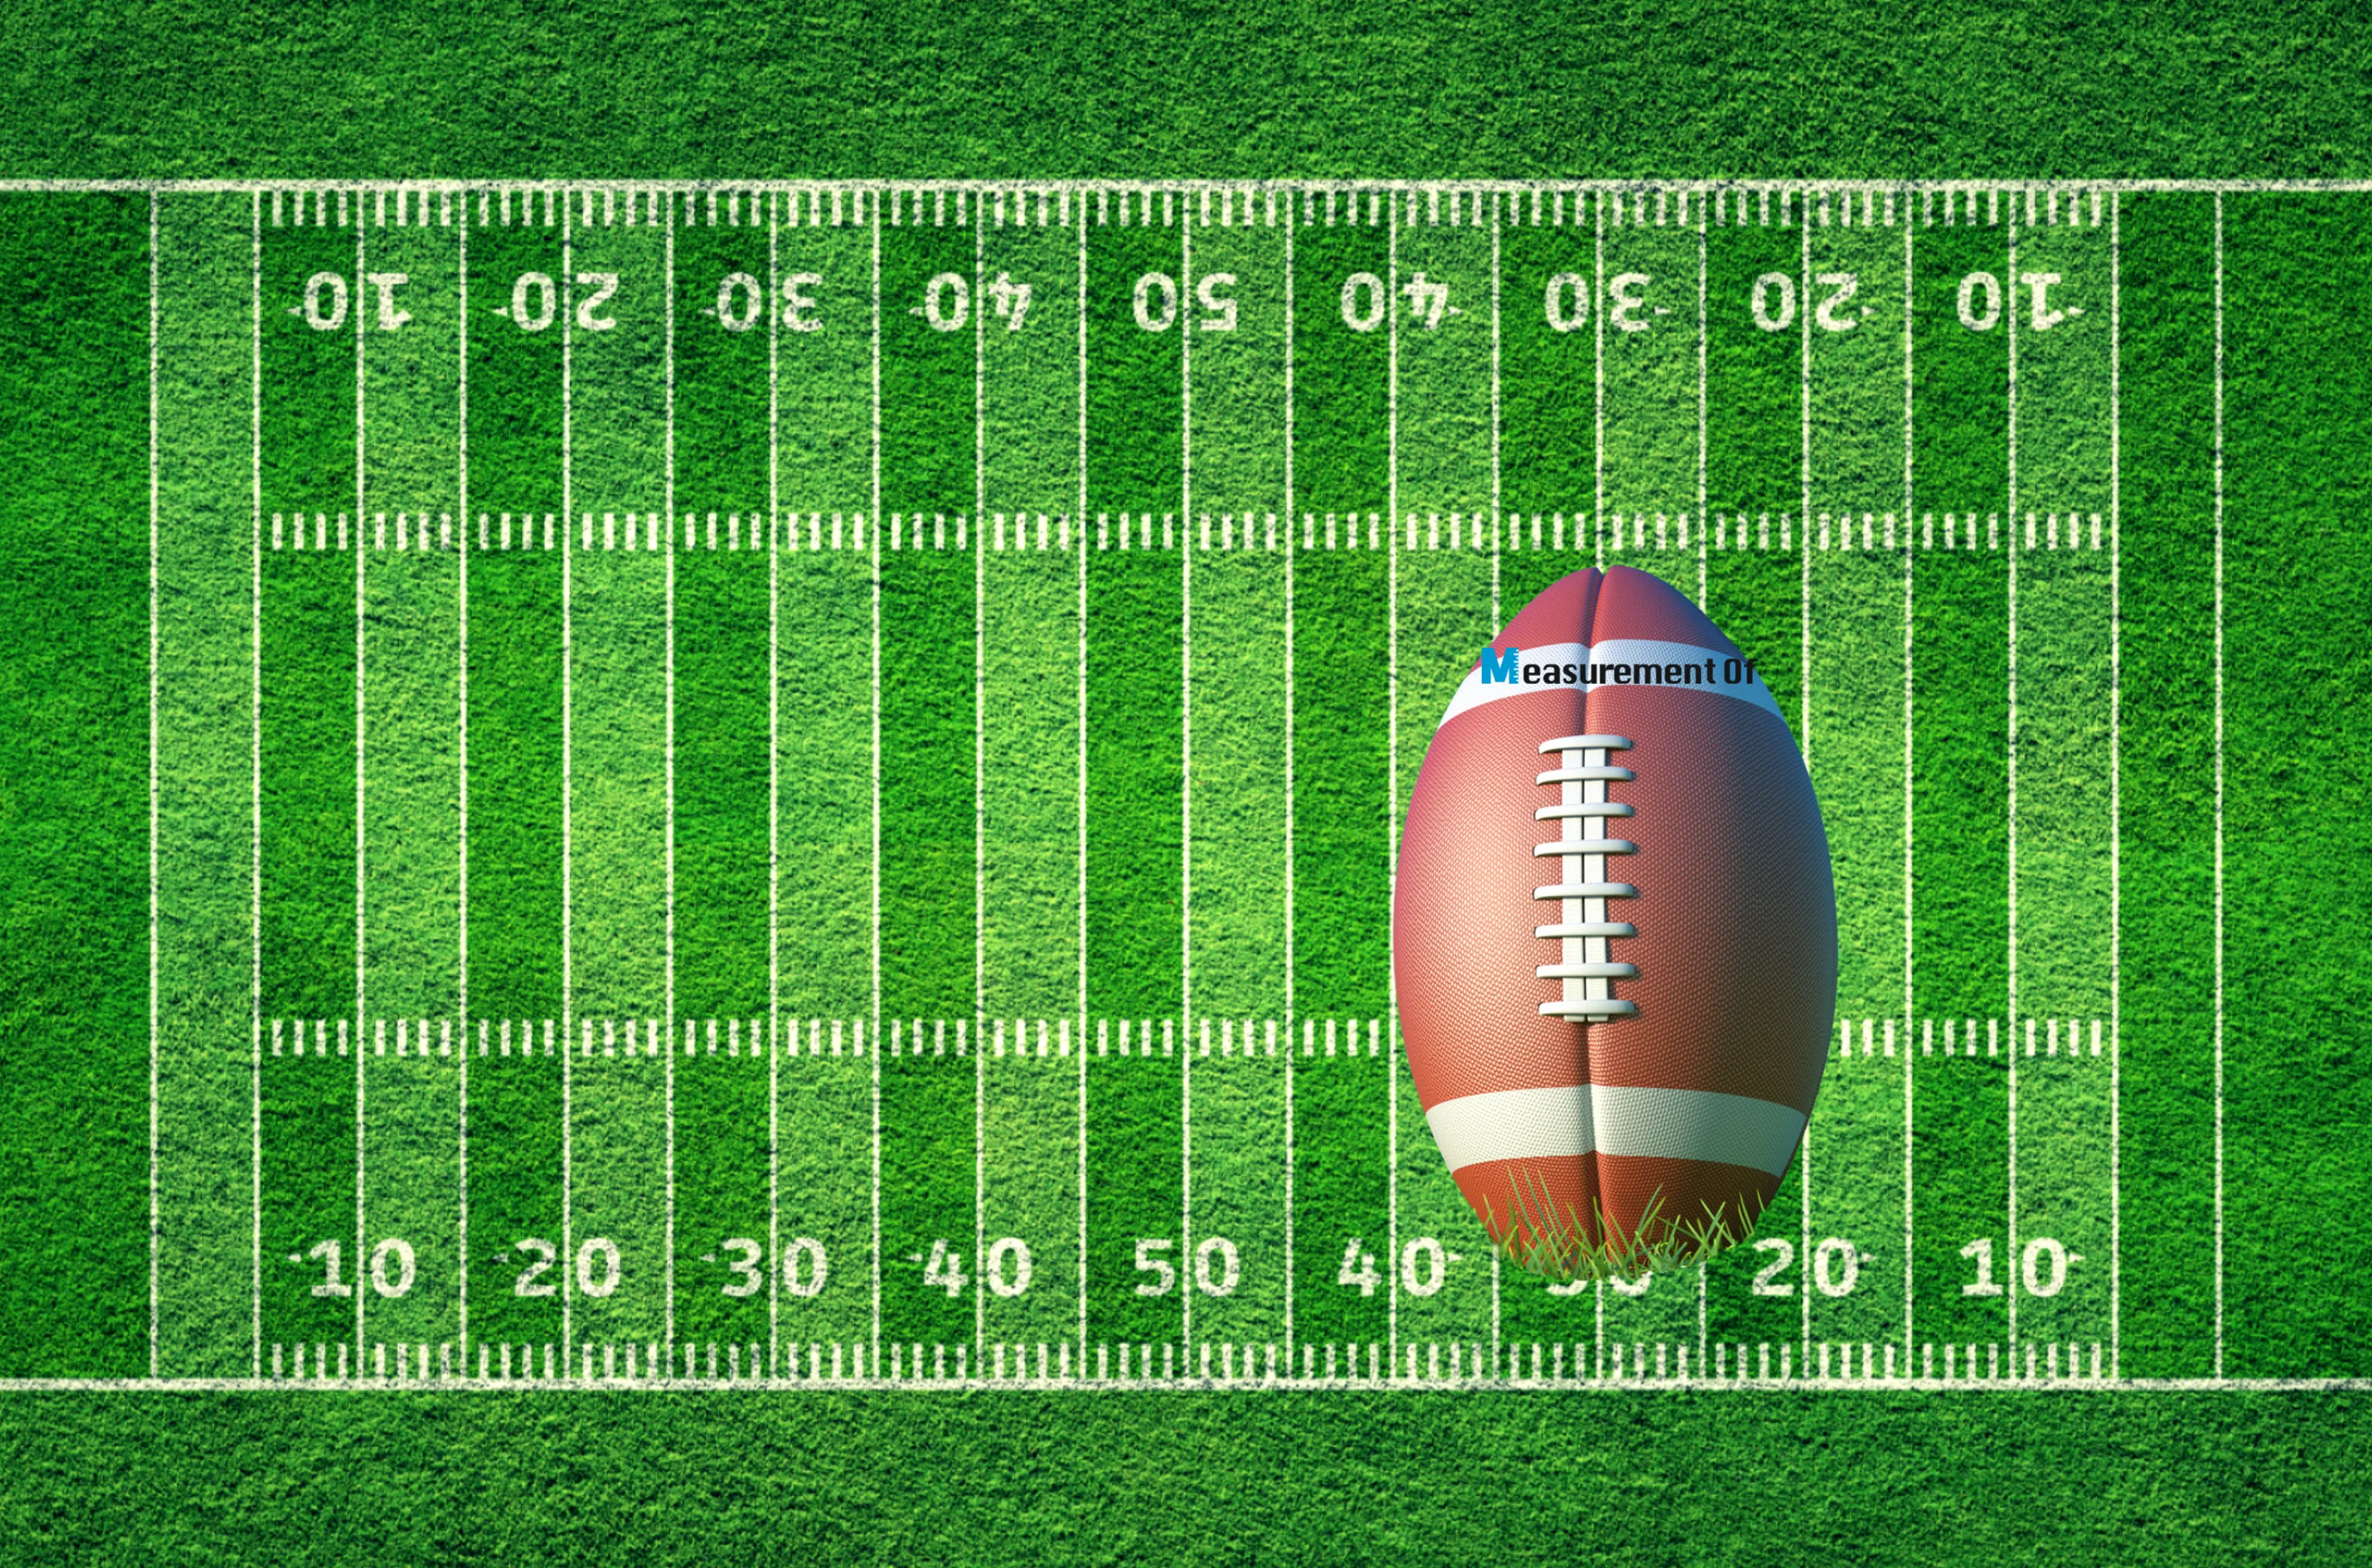 American Football Field Dimension - All You Need to Know!